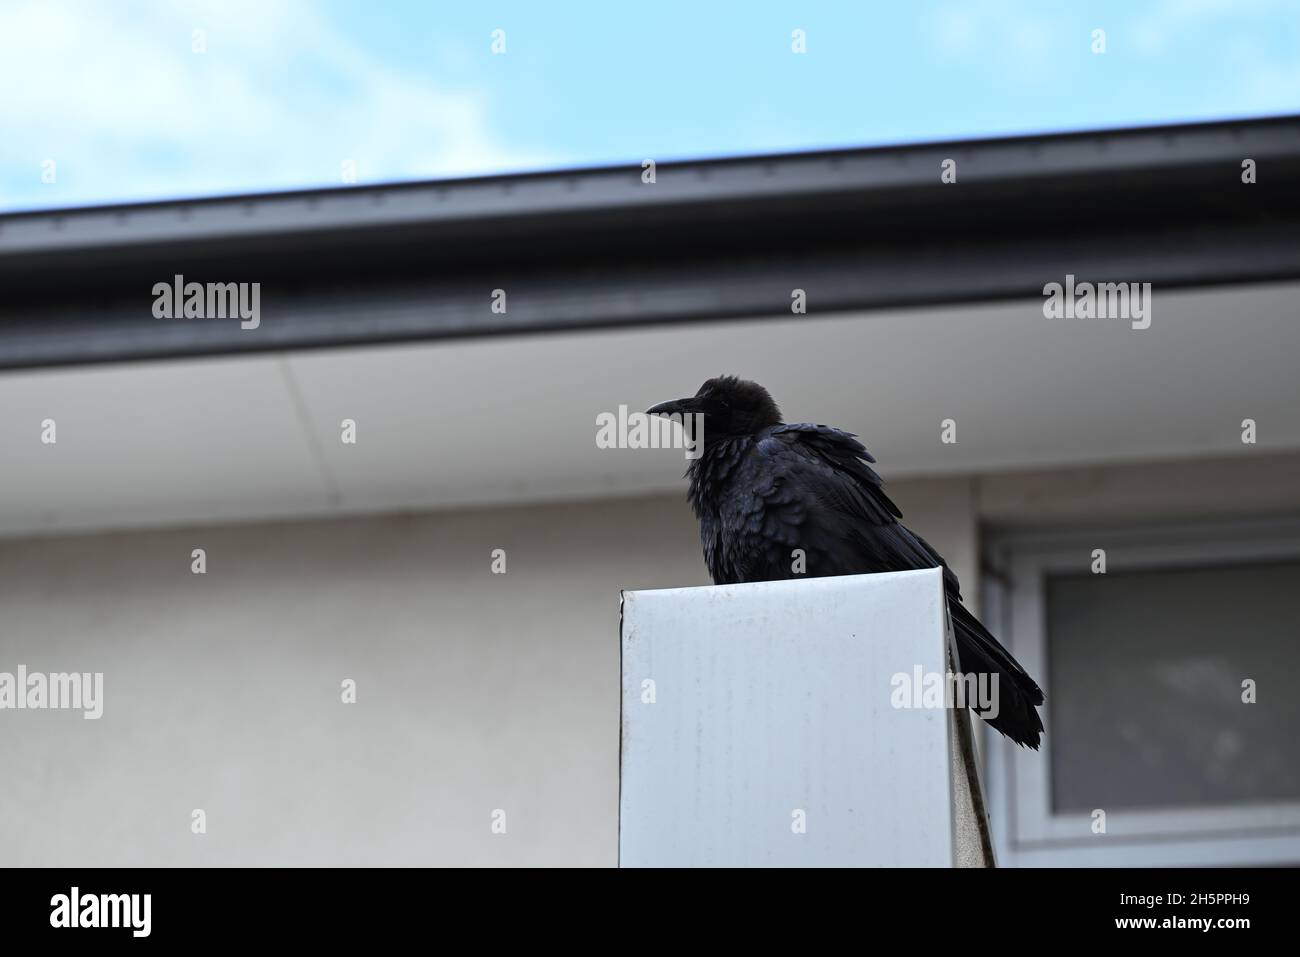 Juvenile little raven, with its feathers fluffed up, perched in front of a white home on a sunny day Stock Photo